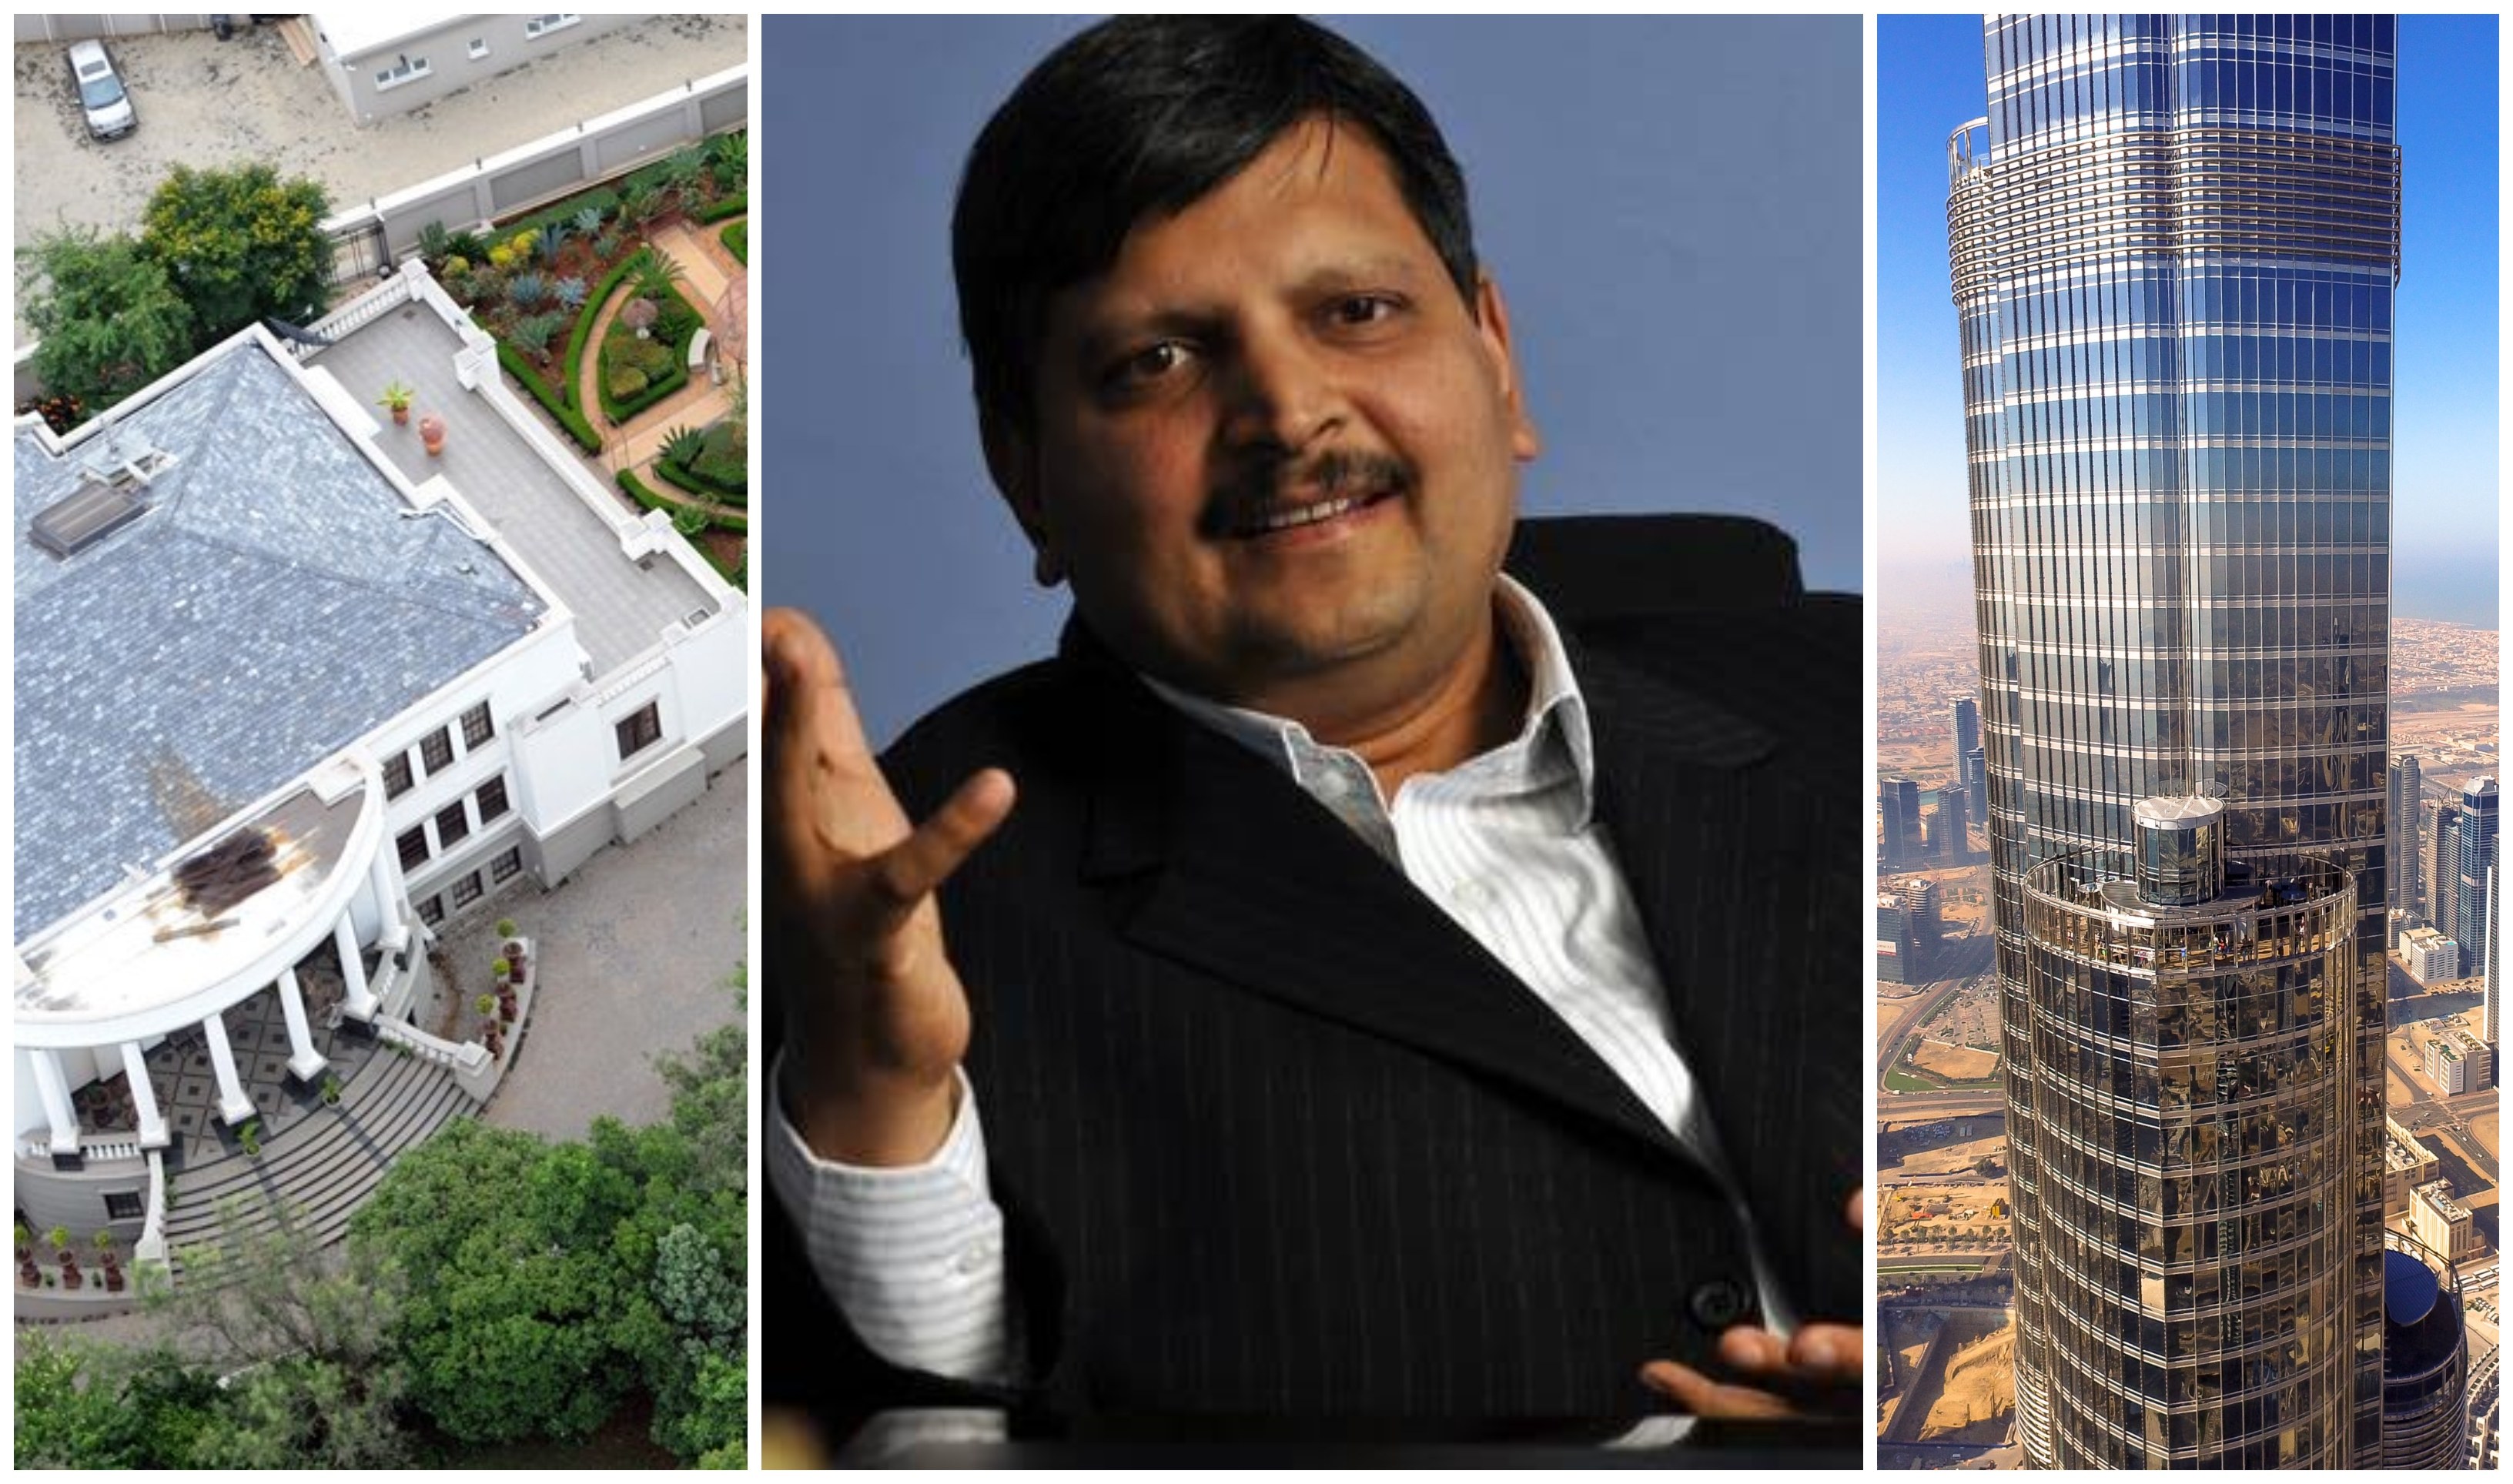 Once close to South Africa’s former president Jacob Zuma, today the Gupta family – including Atul, shown here – are today disgraced and under investigation. Photos: Twitter, Agency